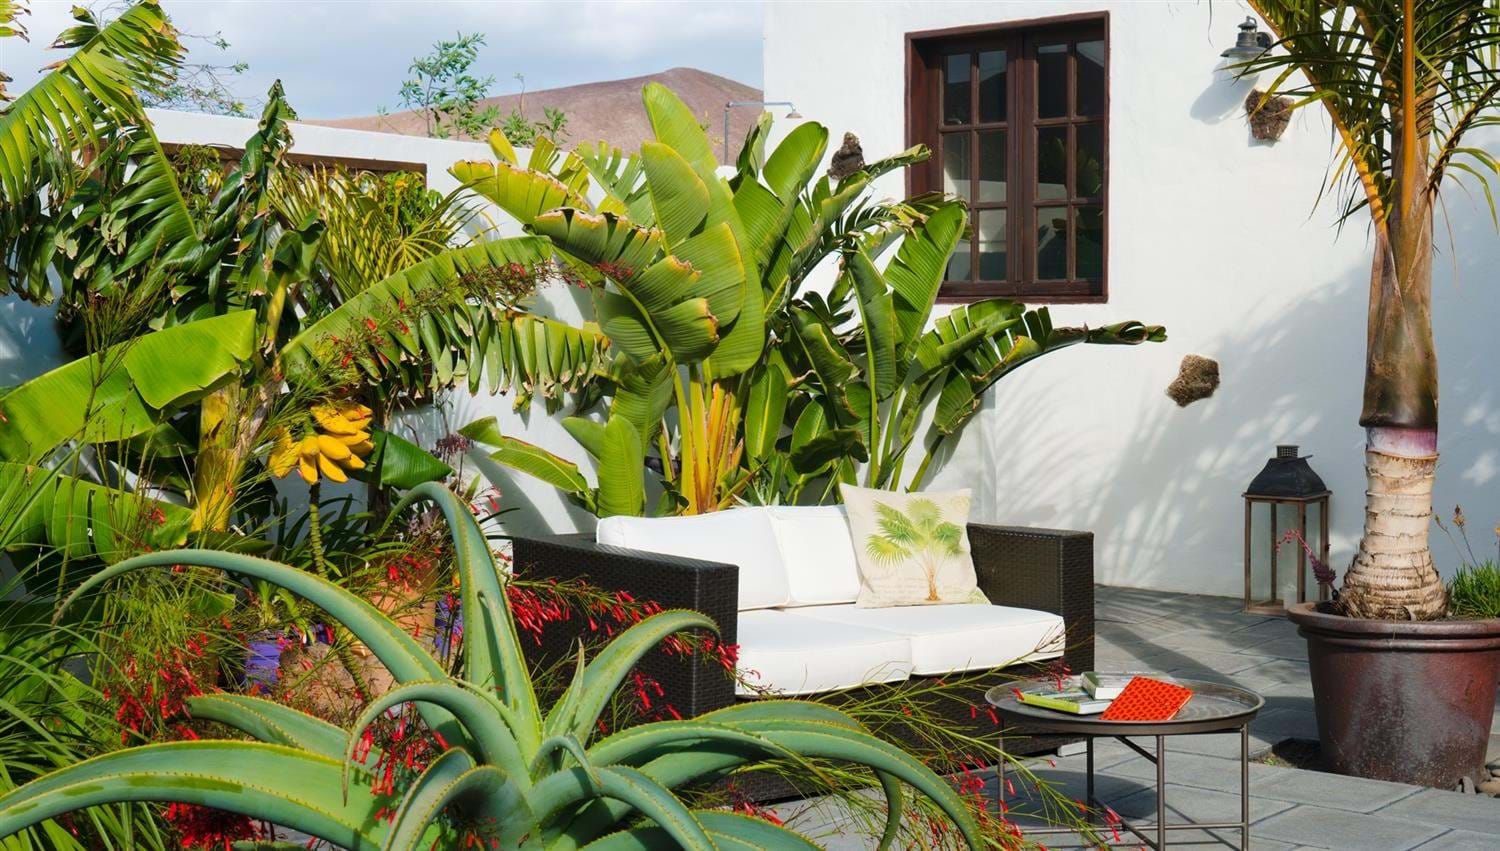 A comfy outdoor sofa surrounded by tropical plants at Finca Botanico in Lanzarote